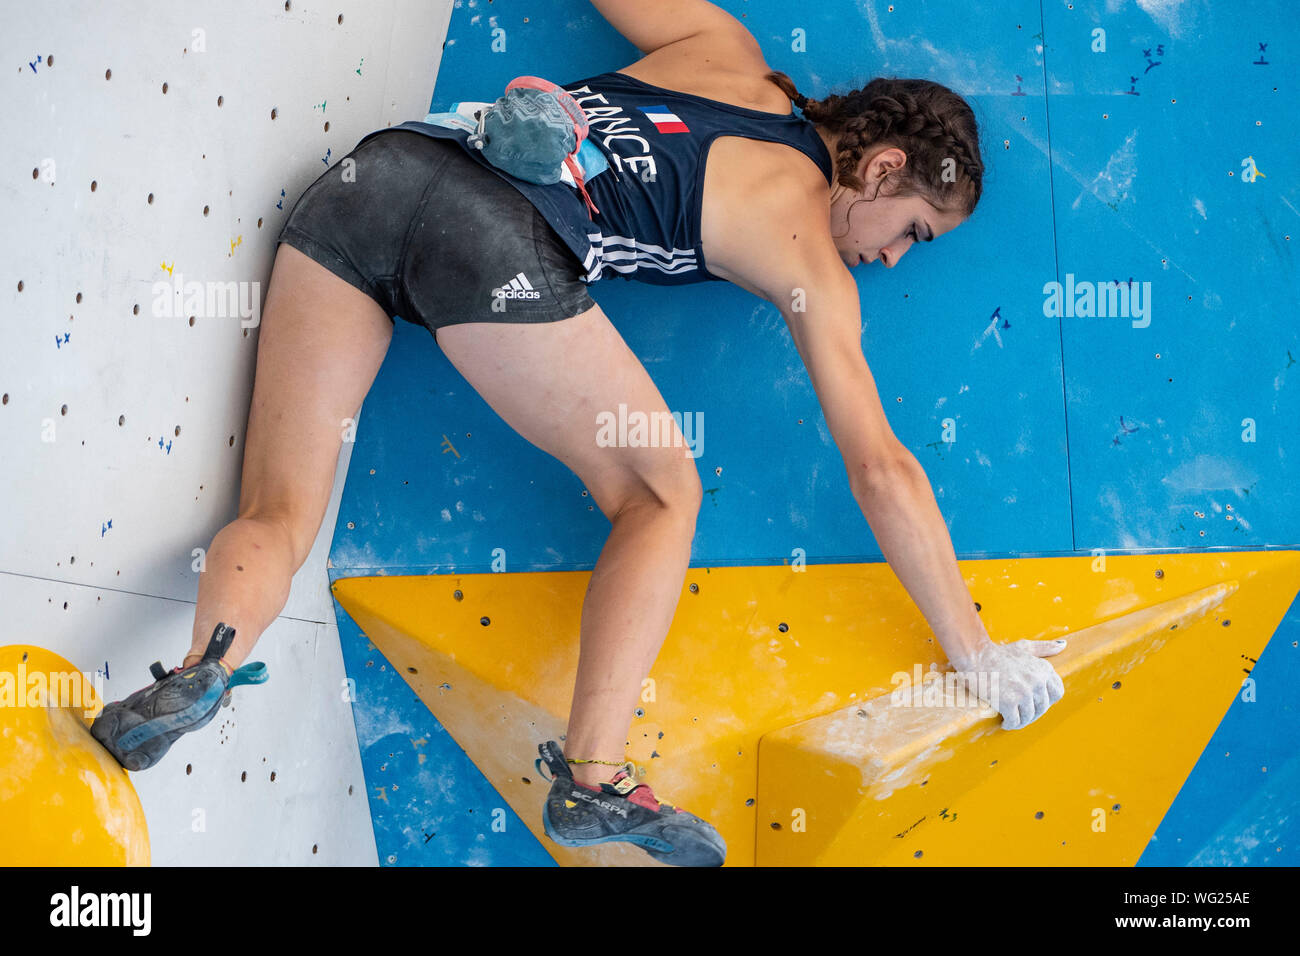 Luce Douady of France during the IFSC Climbing Youth World